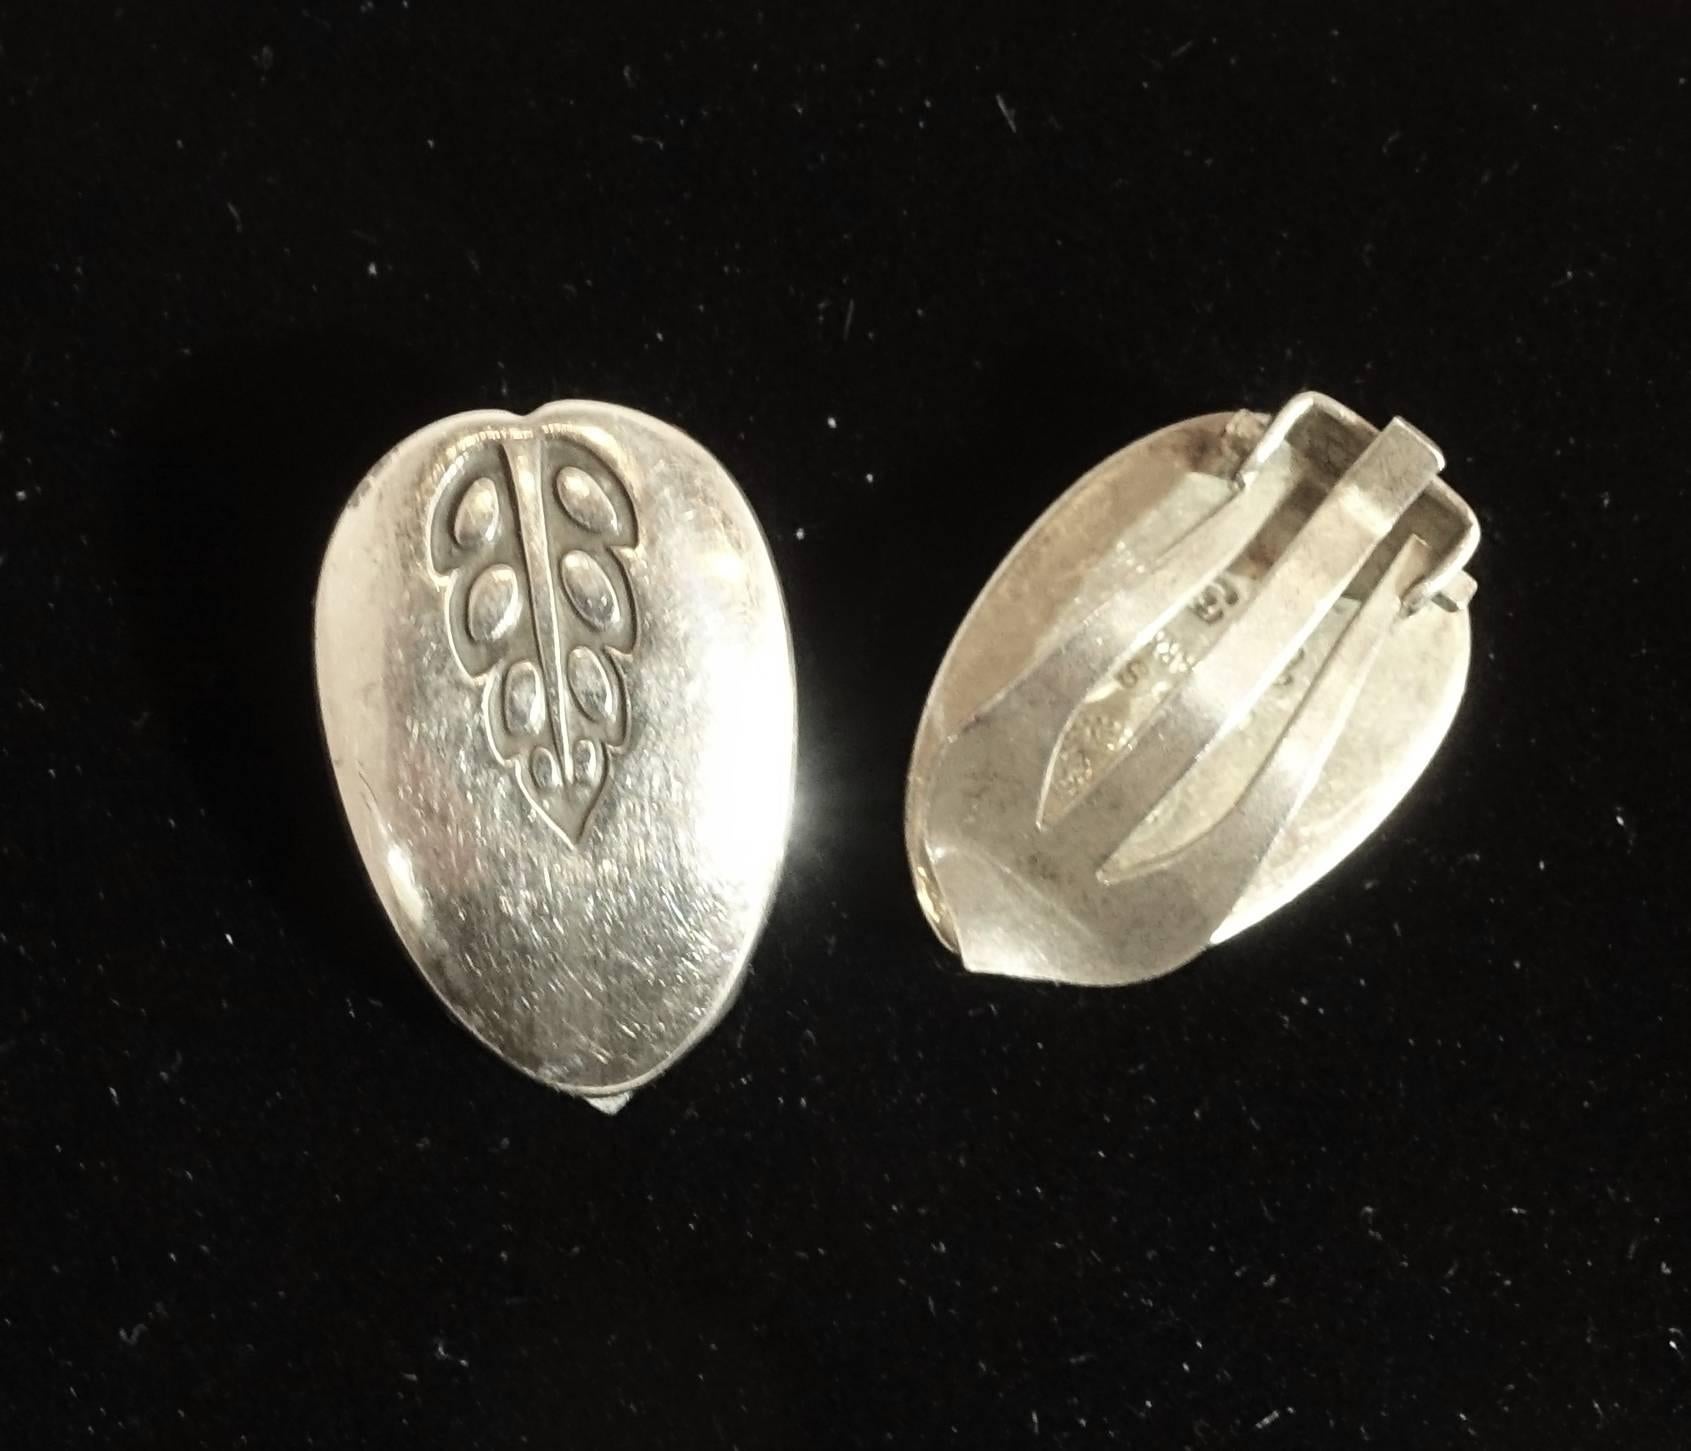 These vintage sterling silver Georg Jensen clip back earrings may be delicate looking … but they will compliment your ears just right.  It is simple, yet elegant with a teardrop design with engraved leaves at the top.  They measure 3/4